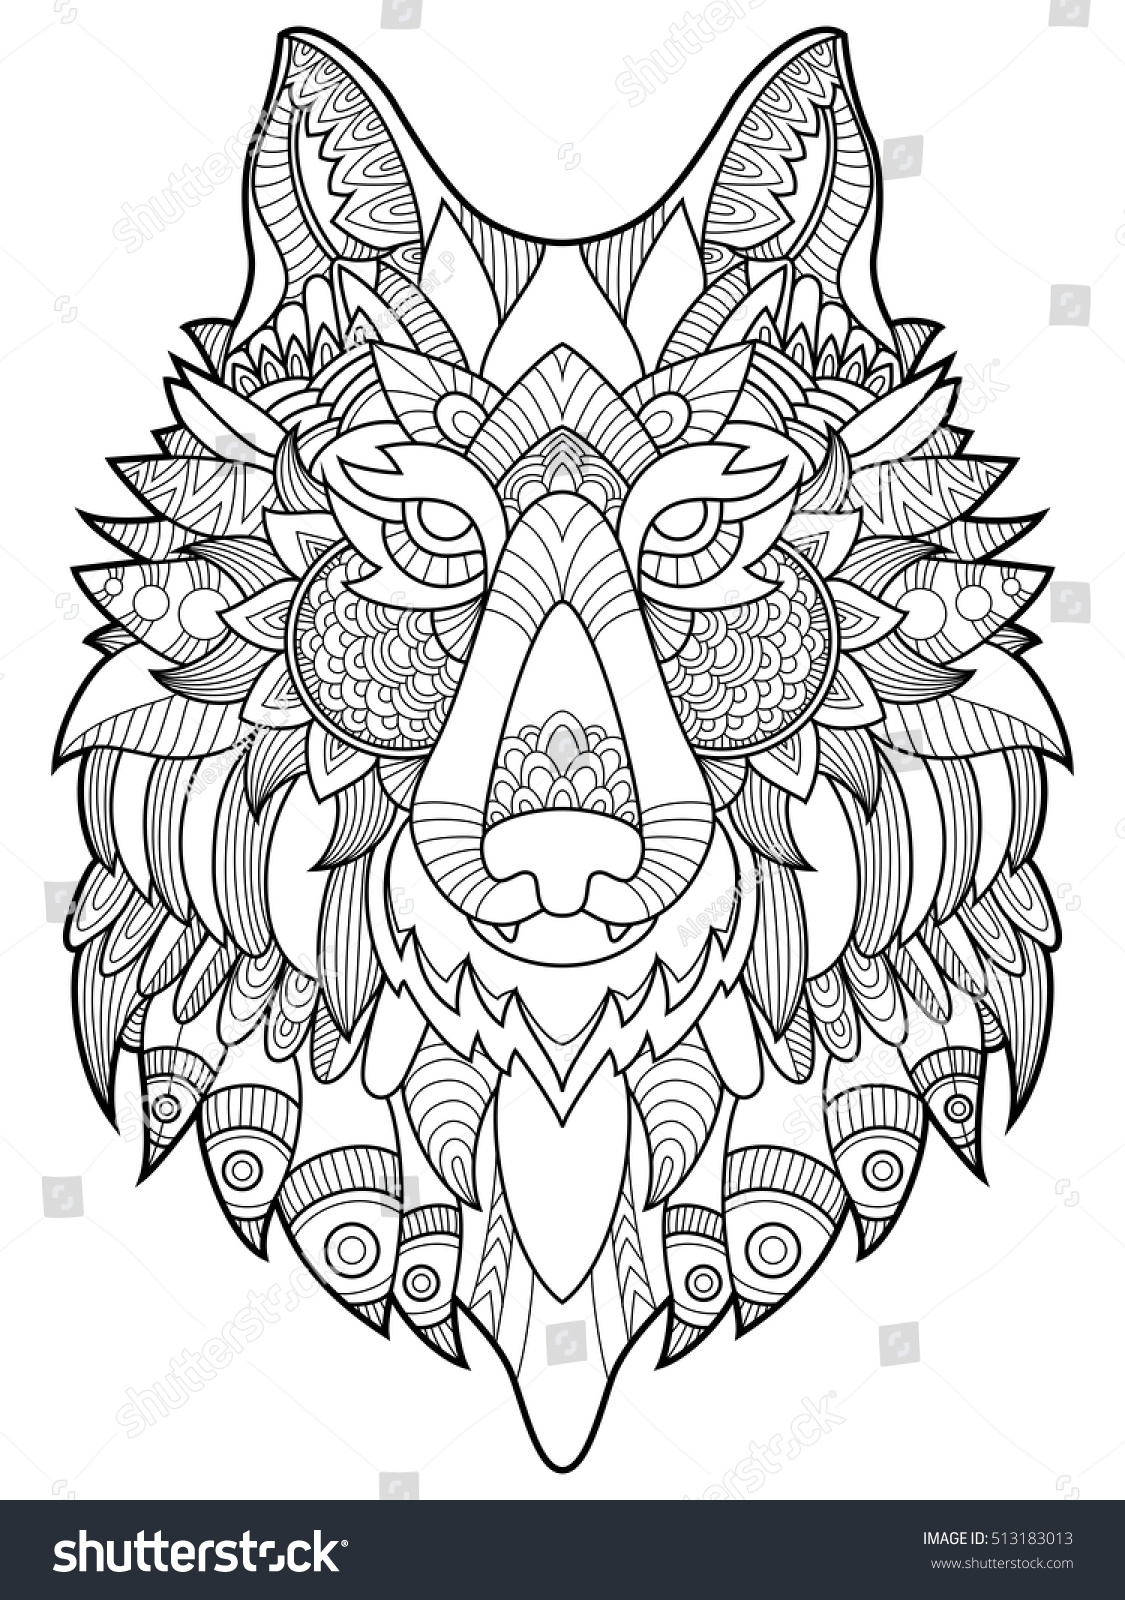 SVG of Wolf coloring book for adults vector illustration. Anti-stress coloring for adult. Tattoo stencil. Zentangle style. Black and white lines. Lace pattern svg